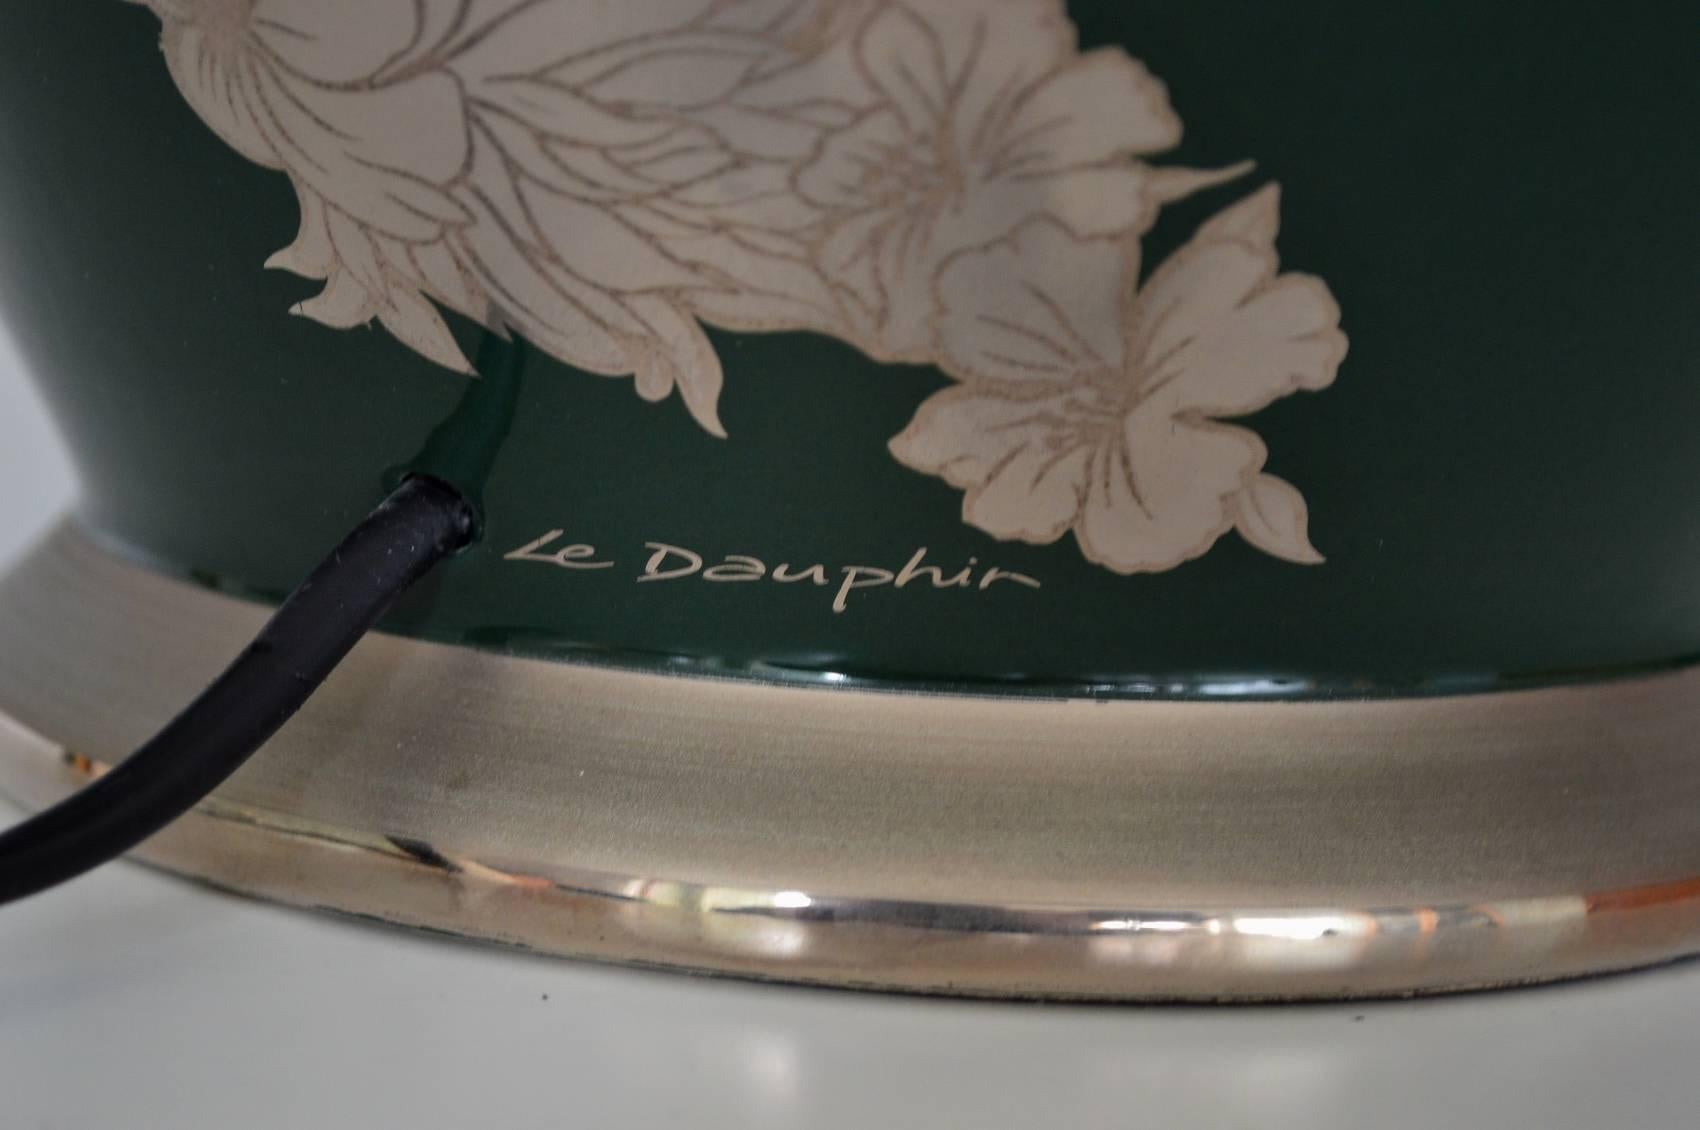 Maison Le Dauphin Ceramic Table Lamp Silver Green, Signed, France Regency, 1970 1